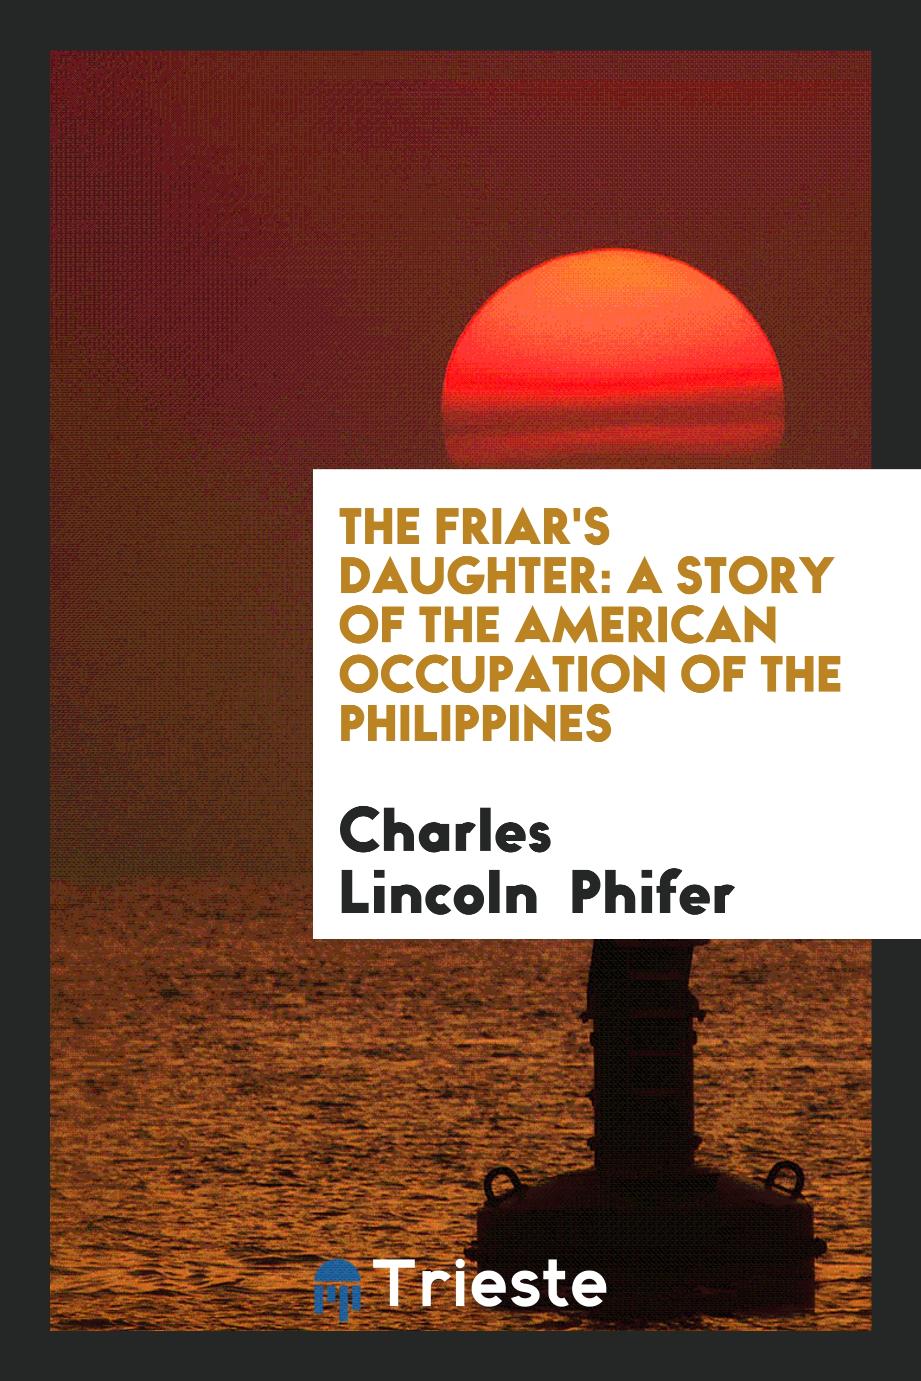 The Friar's Daughter: A Story of the American Occupation of the Philippines